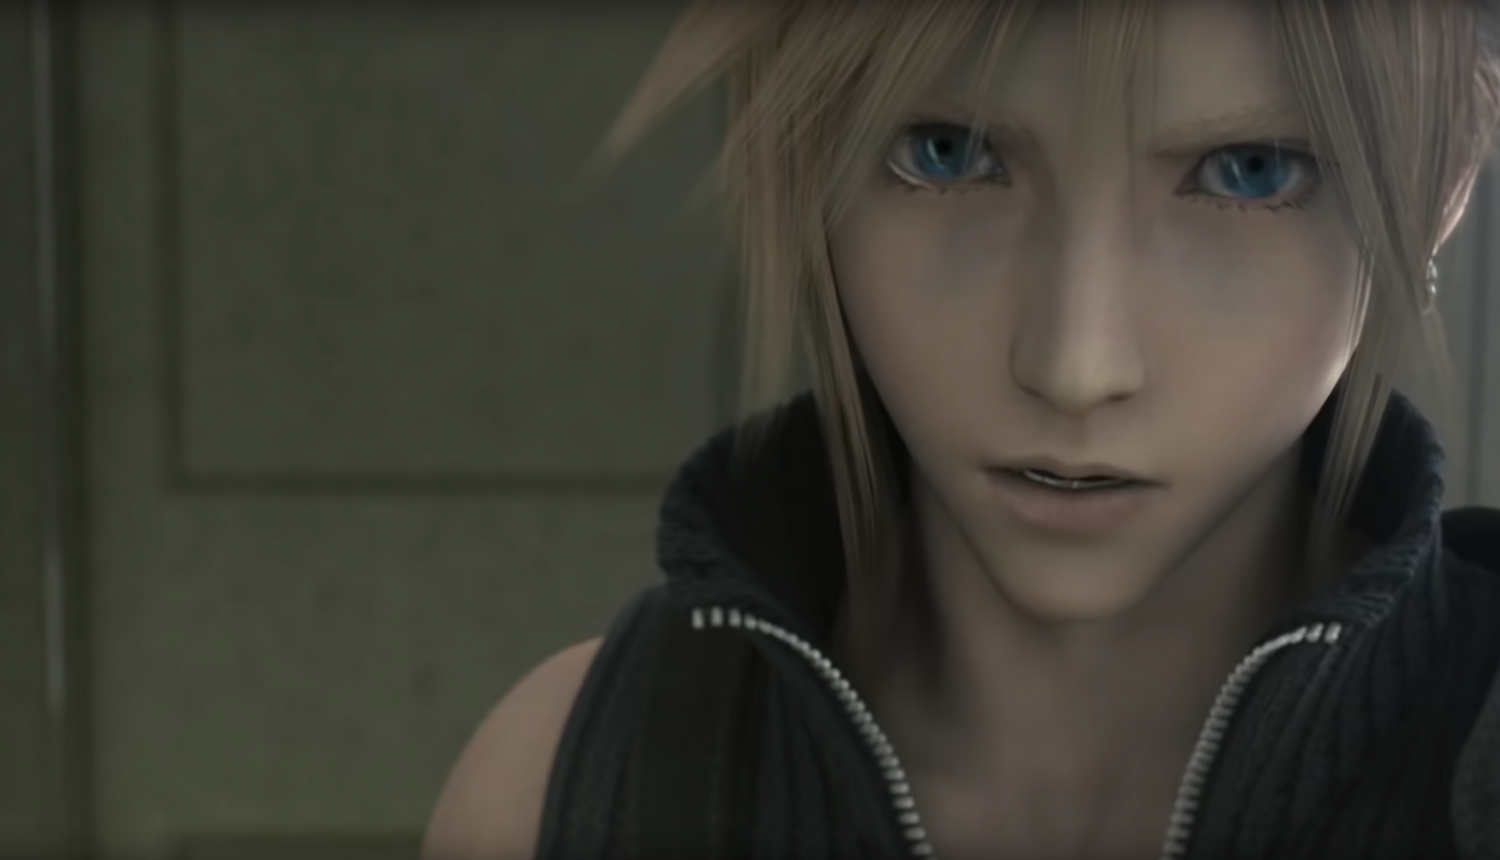 Final Fantasy VII Advent Children is Returning to Theaters